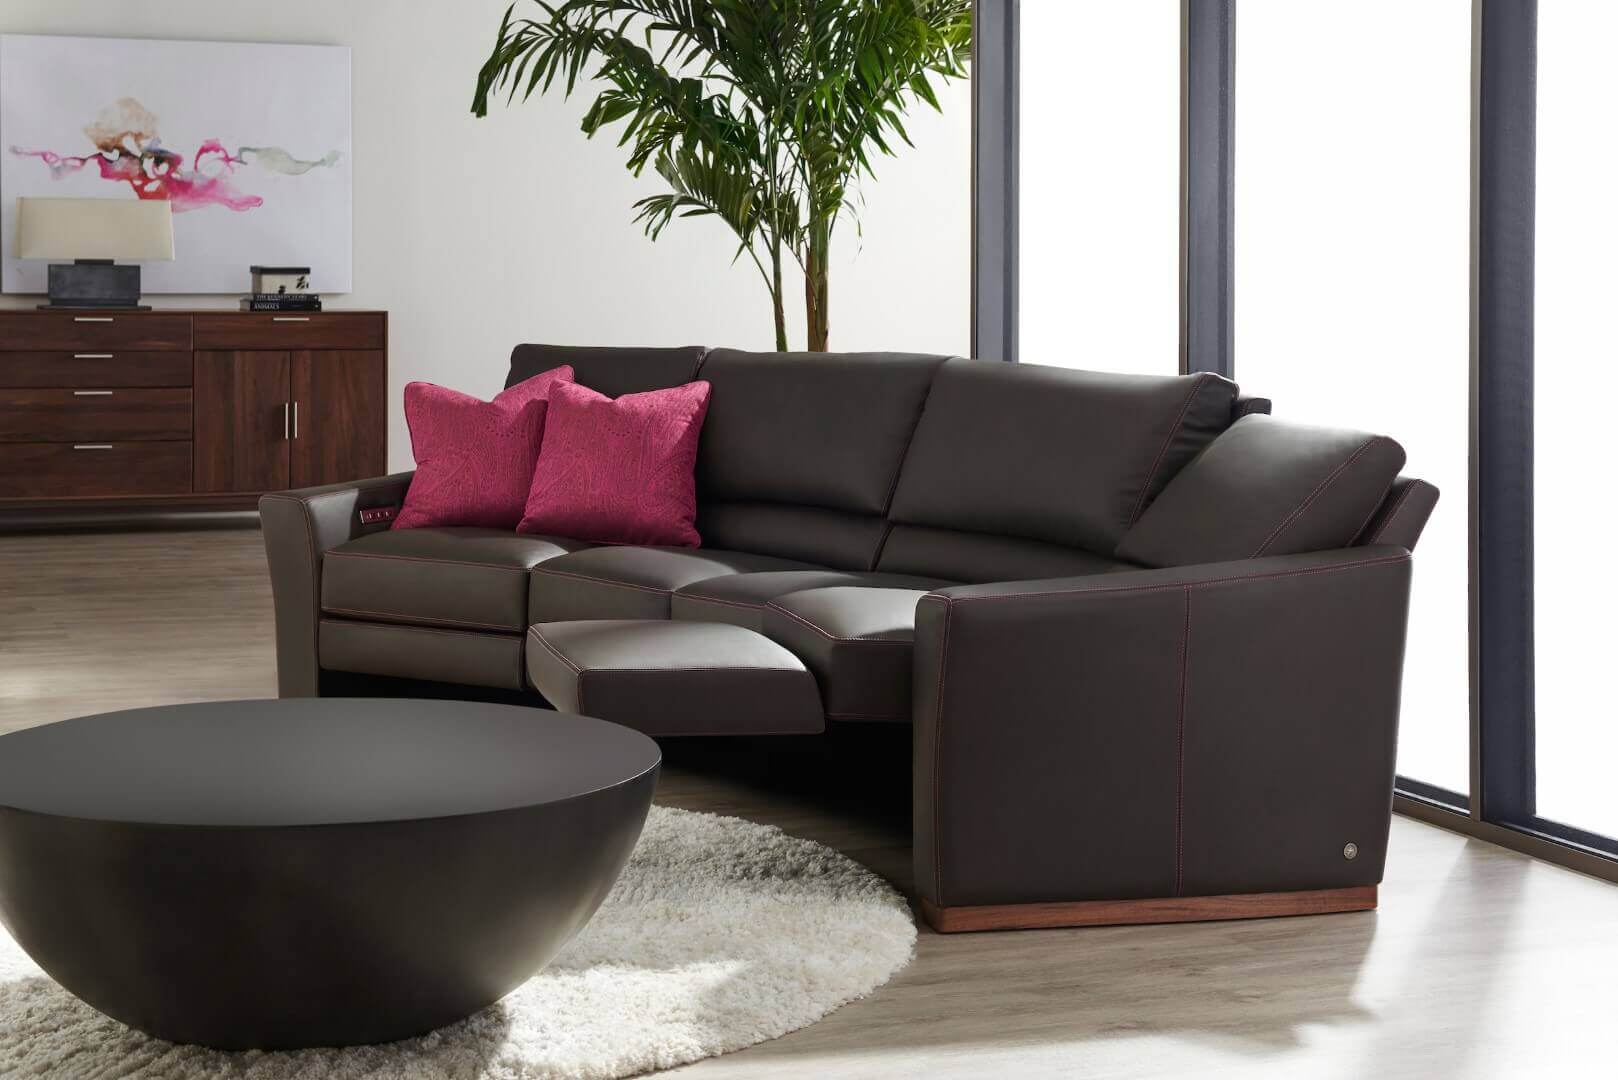 Bryant Wedge Sectional. High-style, custom motion furniture. From our Style-in-Motion Collection.